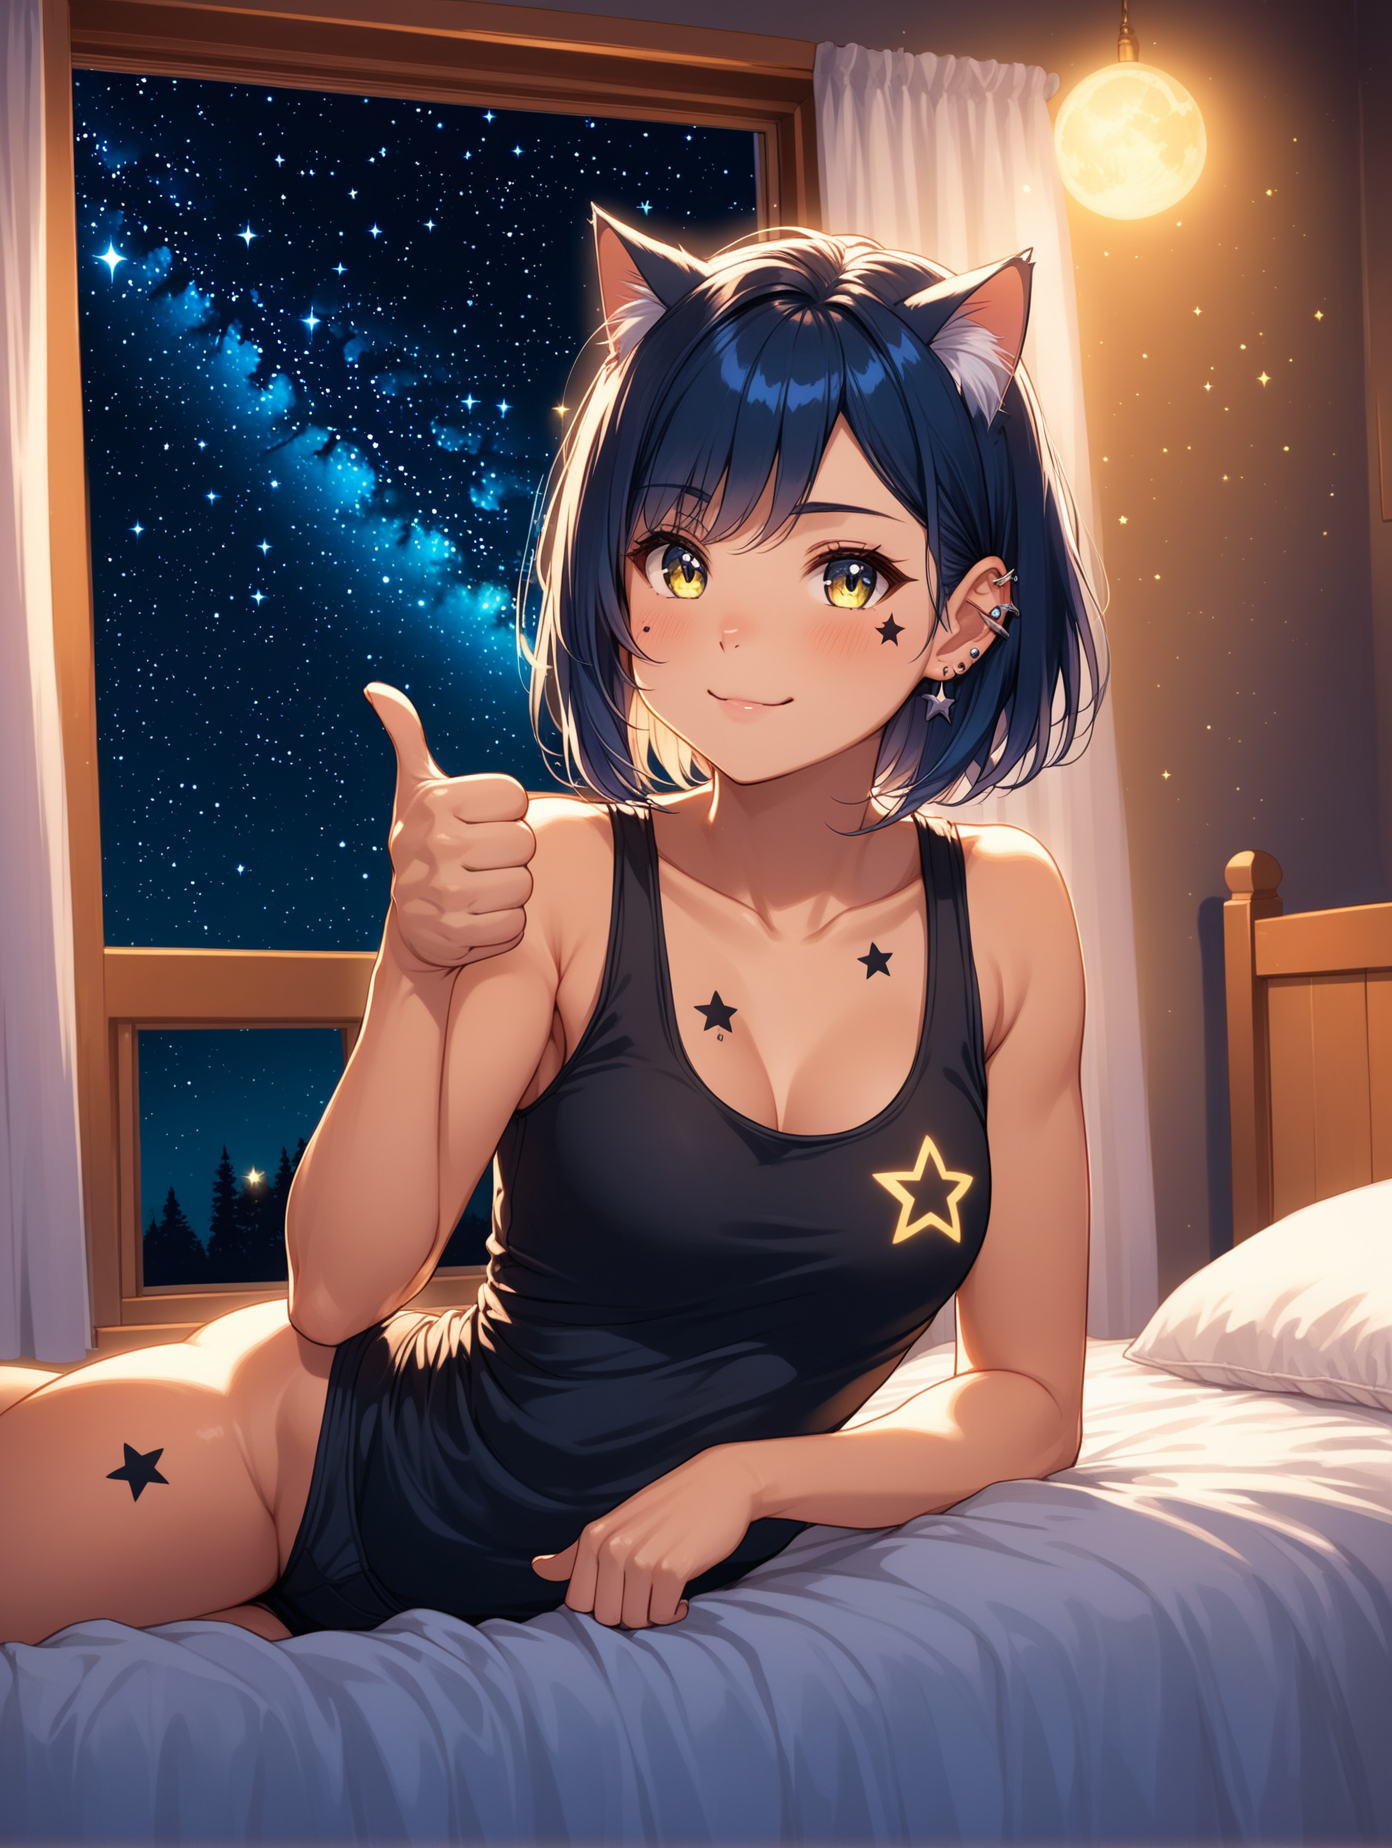 sexy fit 24 year old cat girl, reclining on bed in bedroom, giving thumbs up, short chin length hair, tank top, toned body, star tattoos, piercings, stars in the night sky through window in background, enchanted